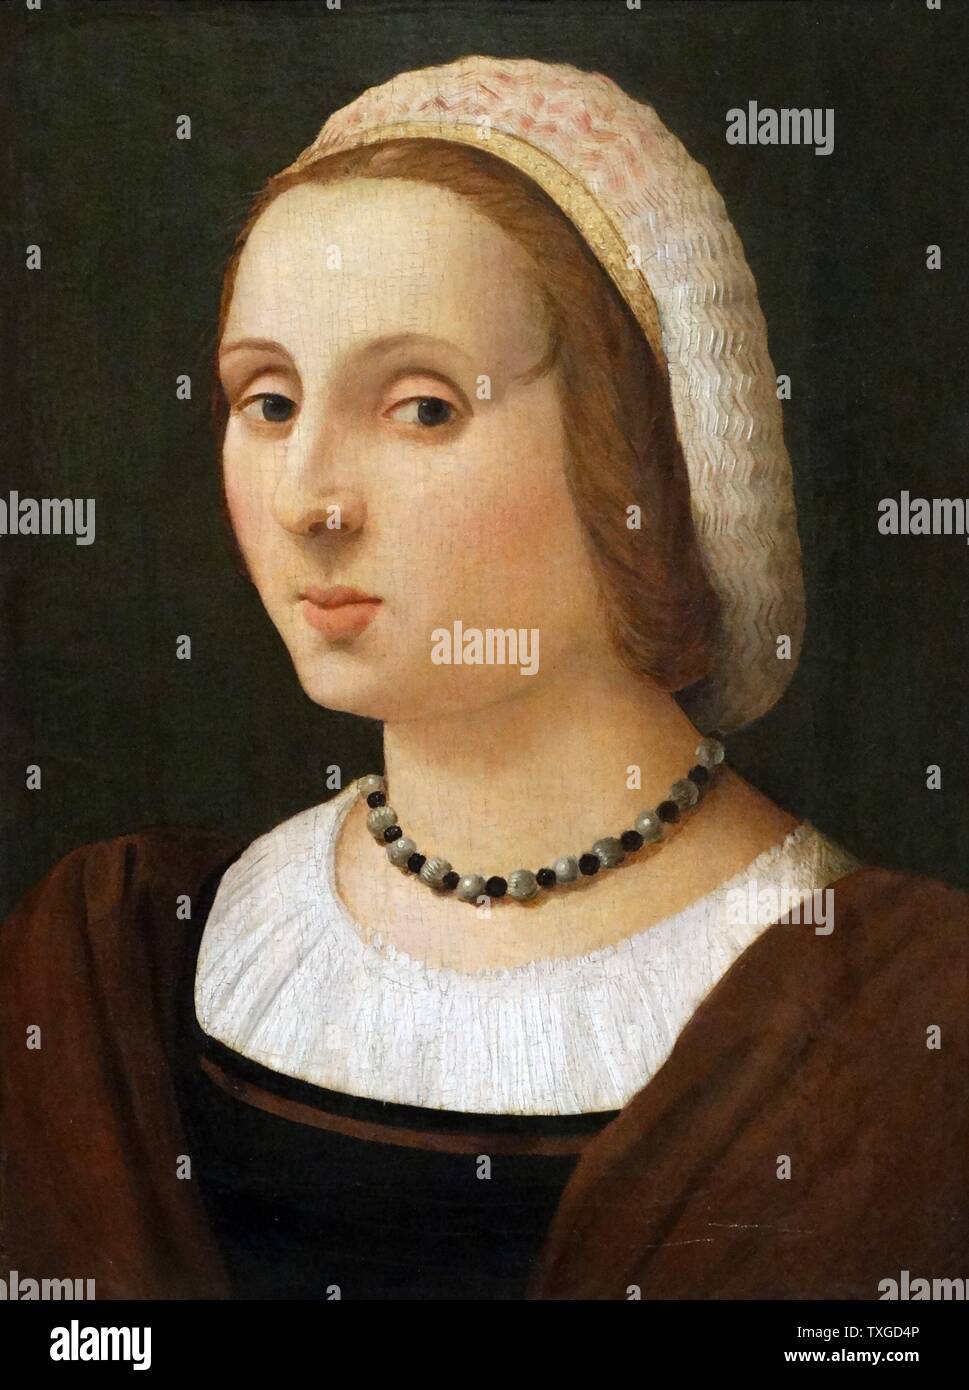 Painting titled 'Portrait of a Lady' by Vincenzo Tamagni (1492-1516) Italian painter of the Renaissance. Dated 16th Century Stock Photo